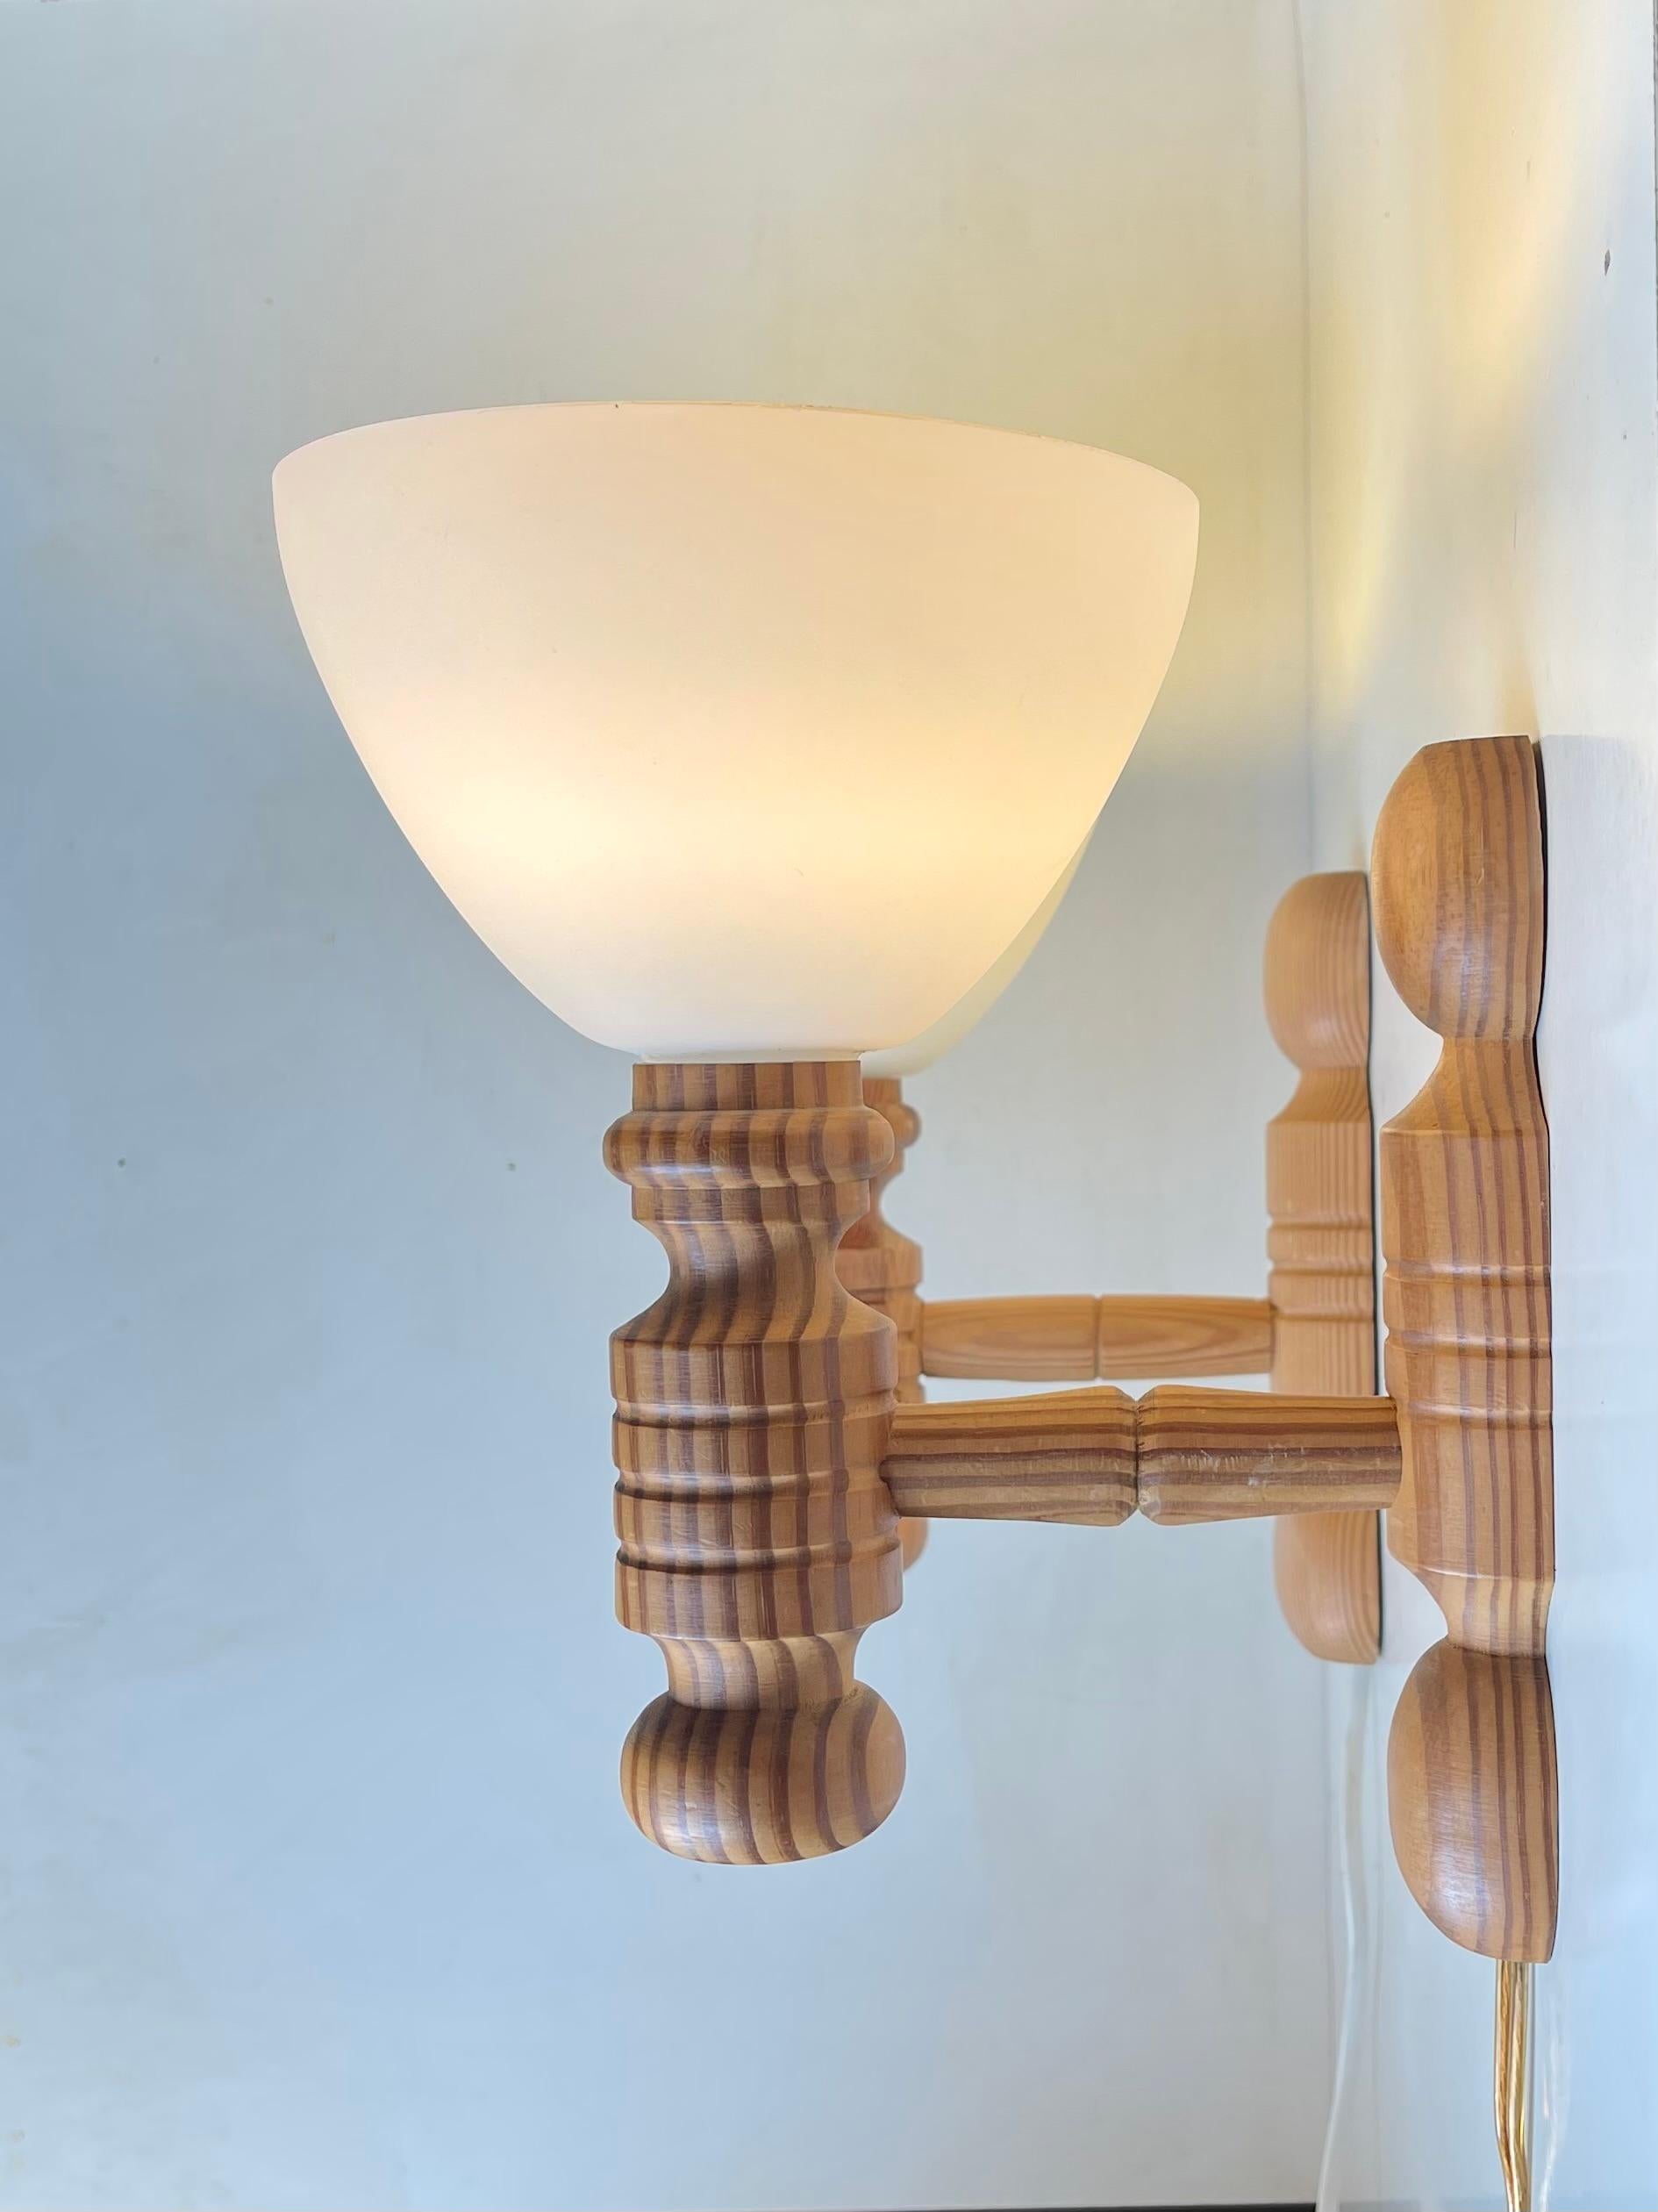 A set of 3 wall lamps fashioned from turned Oregon pine and set with matching shades in white glass. Unknown Scandinavian maker/designer circa 1970-80 in a style reminiscent of Hans Agne Jakobsson and Lisa Pape Johansson. Measurements: H: 26 cm,